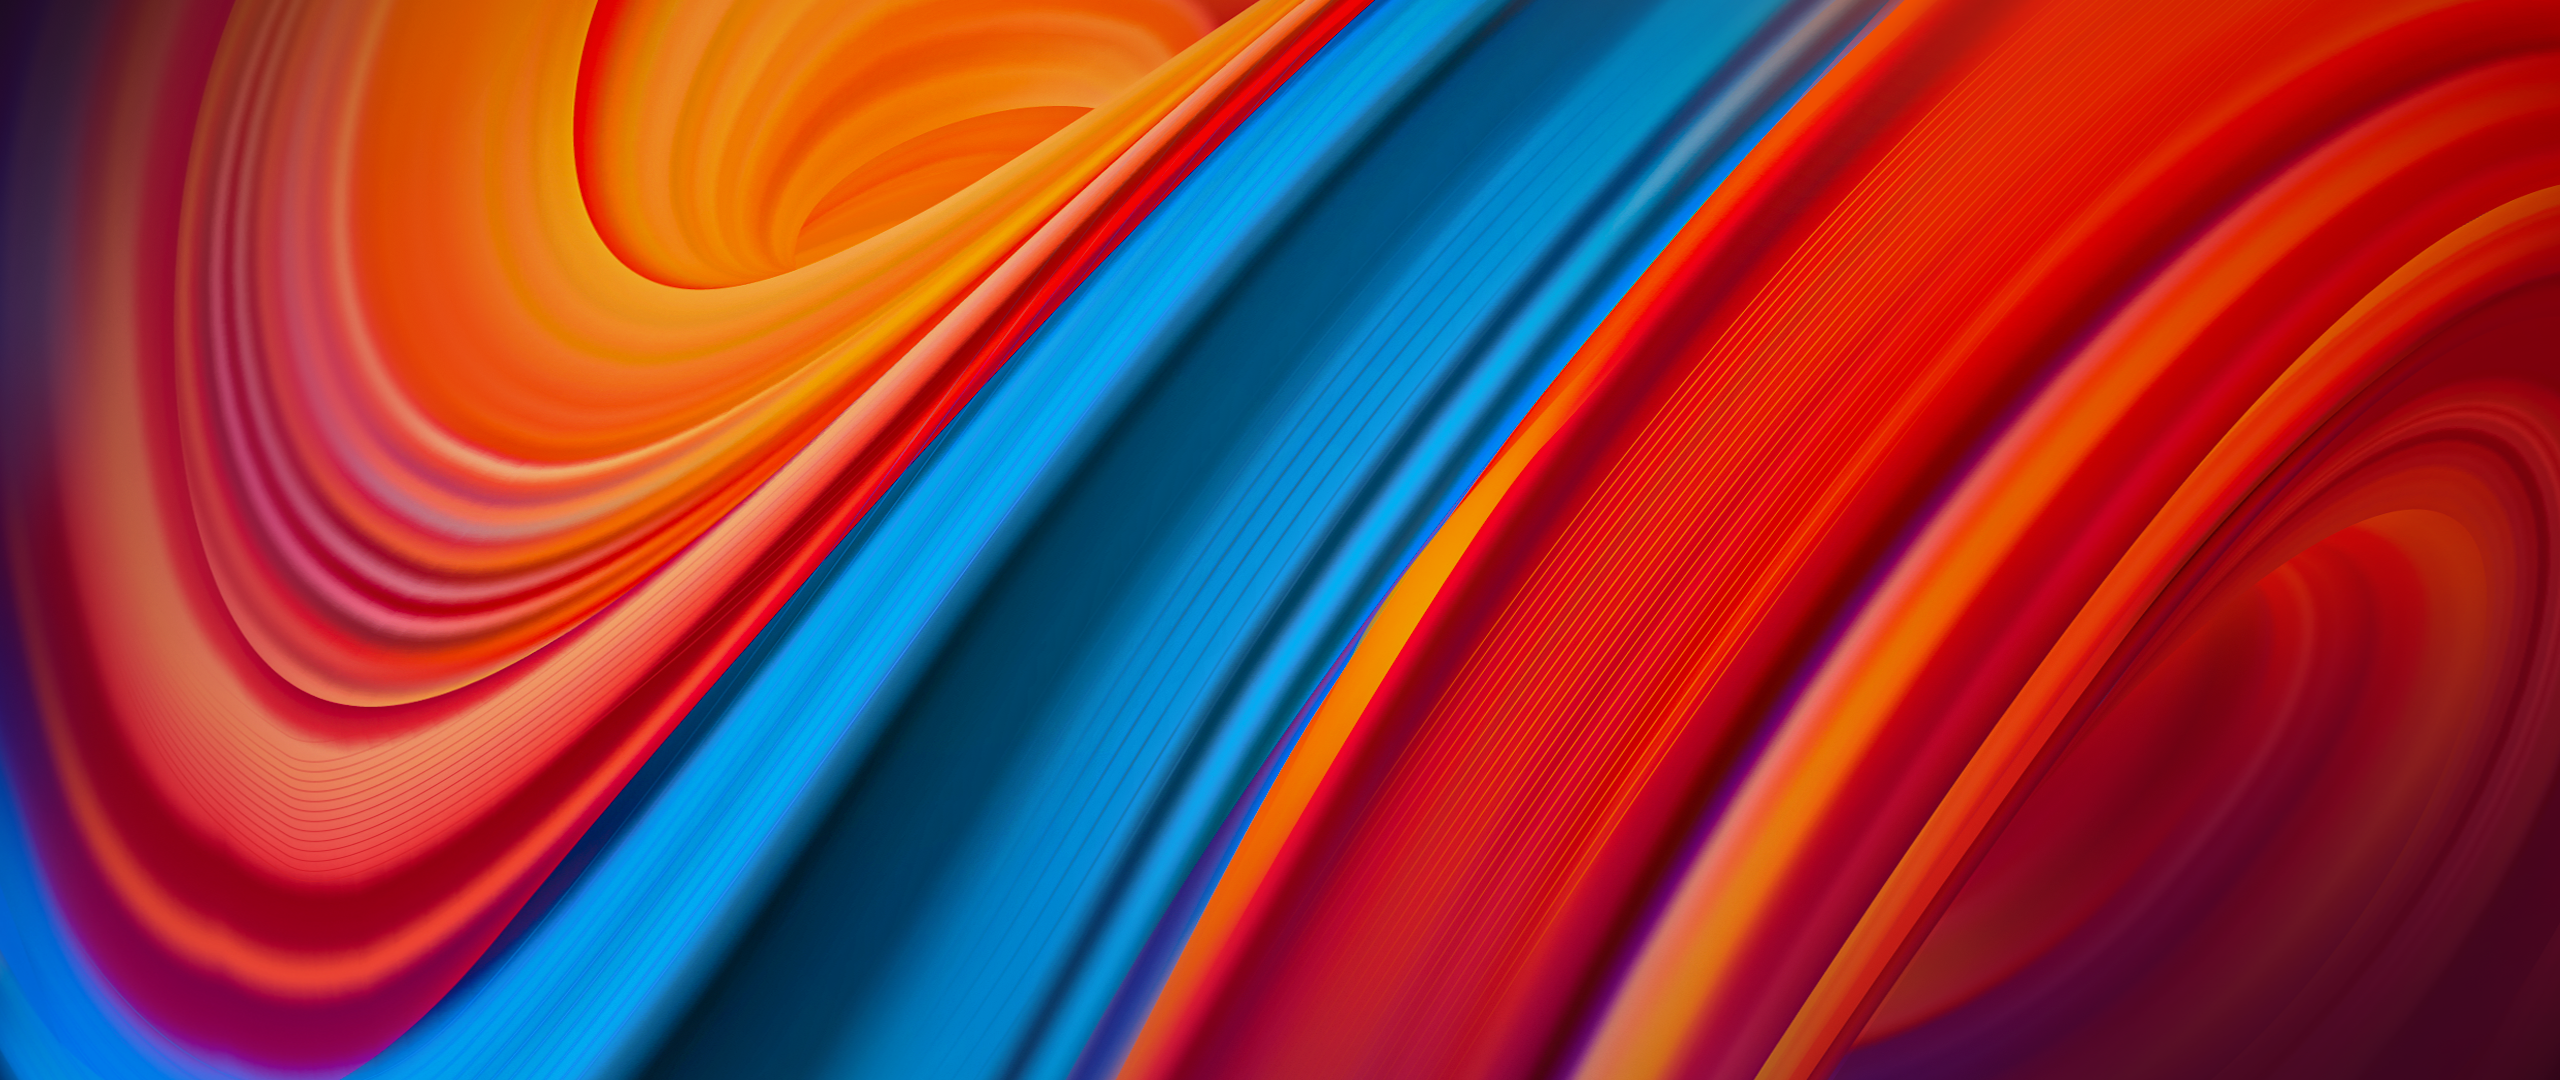 Lenovo Tab P11 Pro Wallpaper 4K, Abstract background, Abstract, #9024